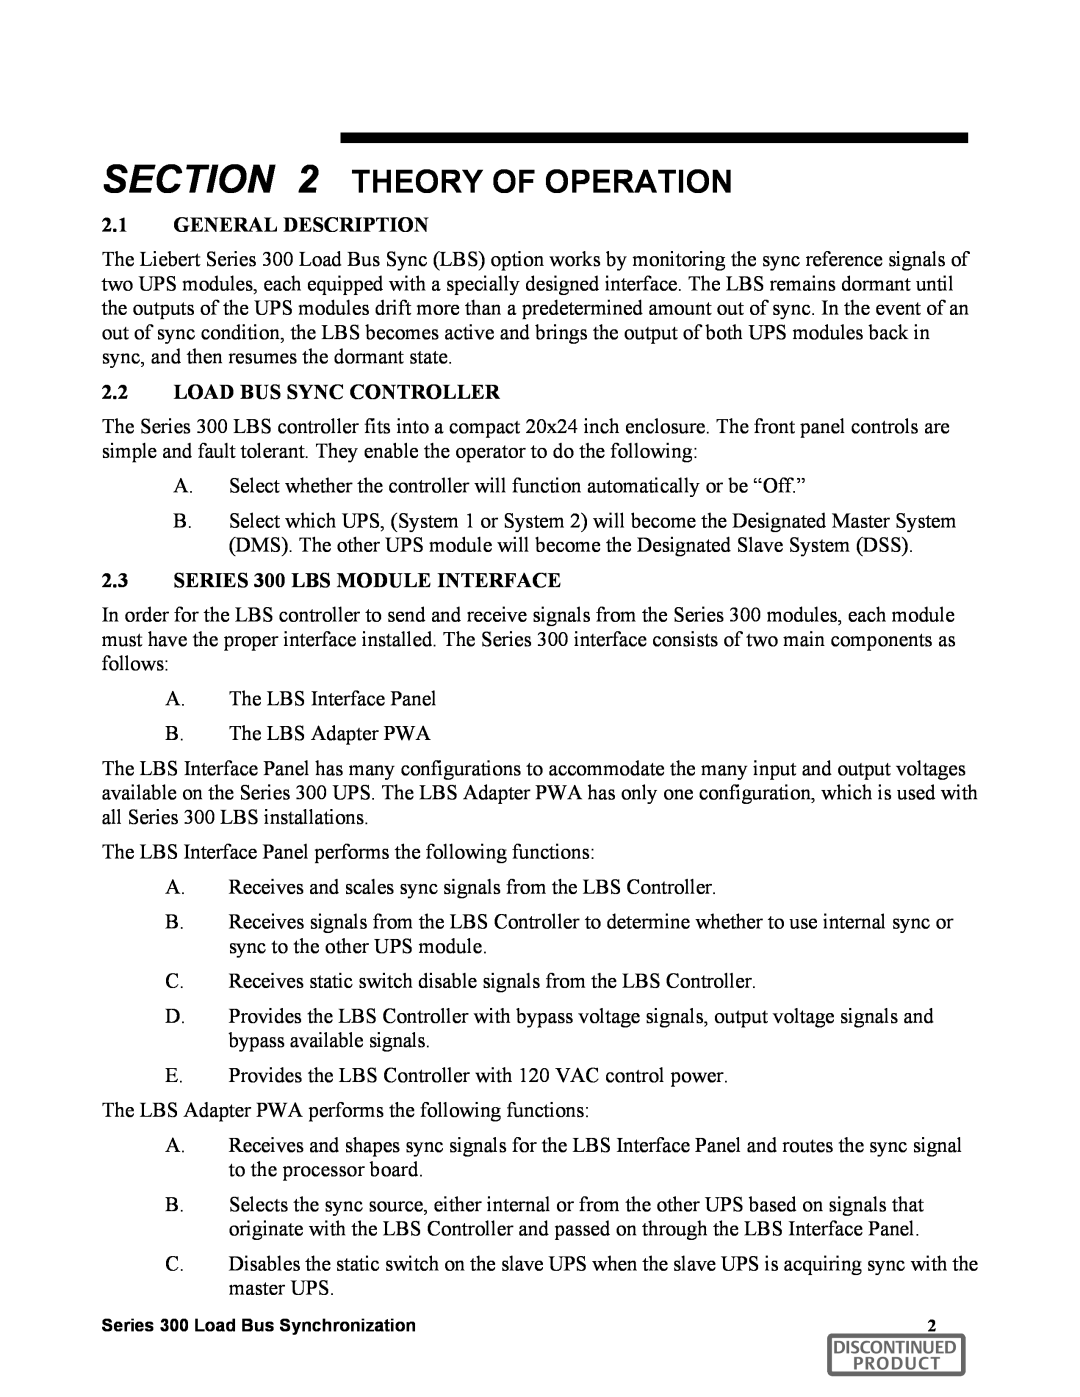 Liebert Theory Of Operation, 2.1GENERAL DESCRIPTION, 2.2LOAD BUS SYNC CONTROLLER, 2.3SERIES 300 LBS MODULE INTERFACE 